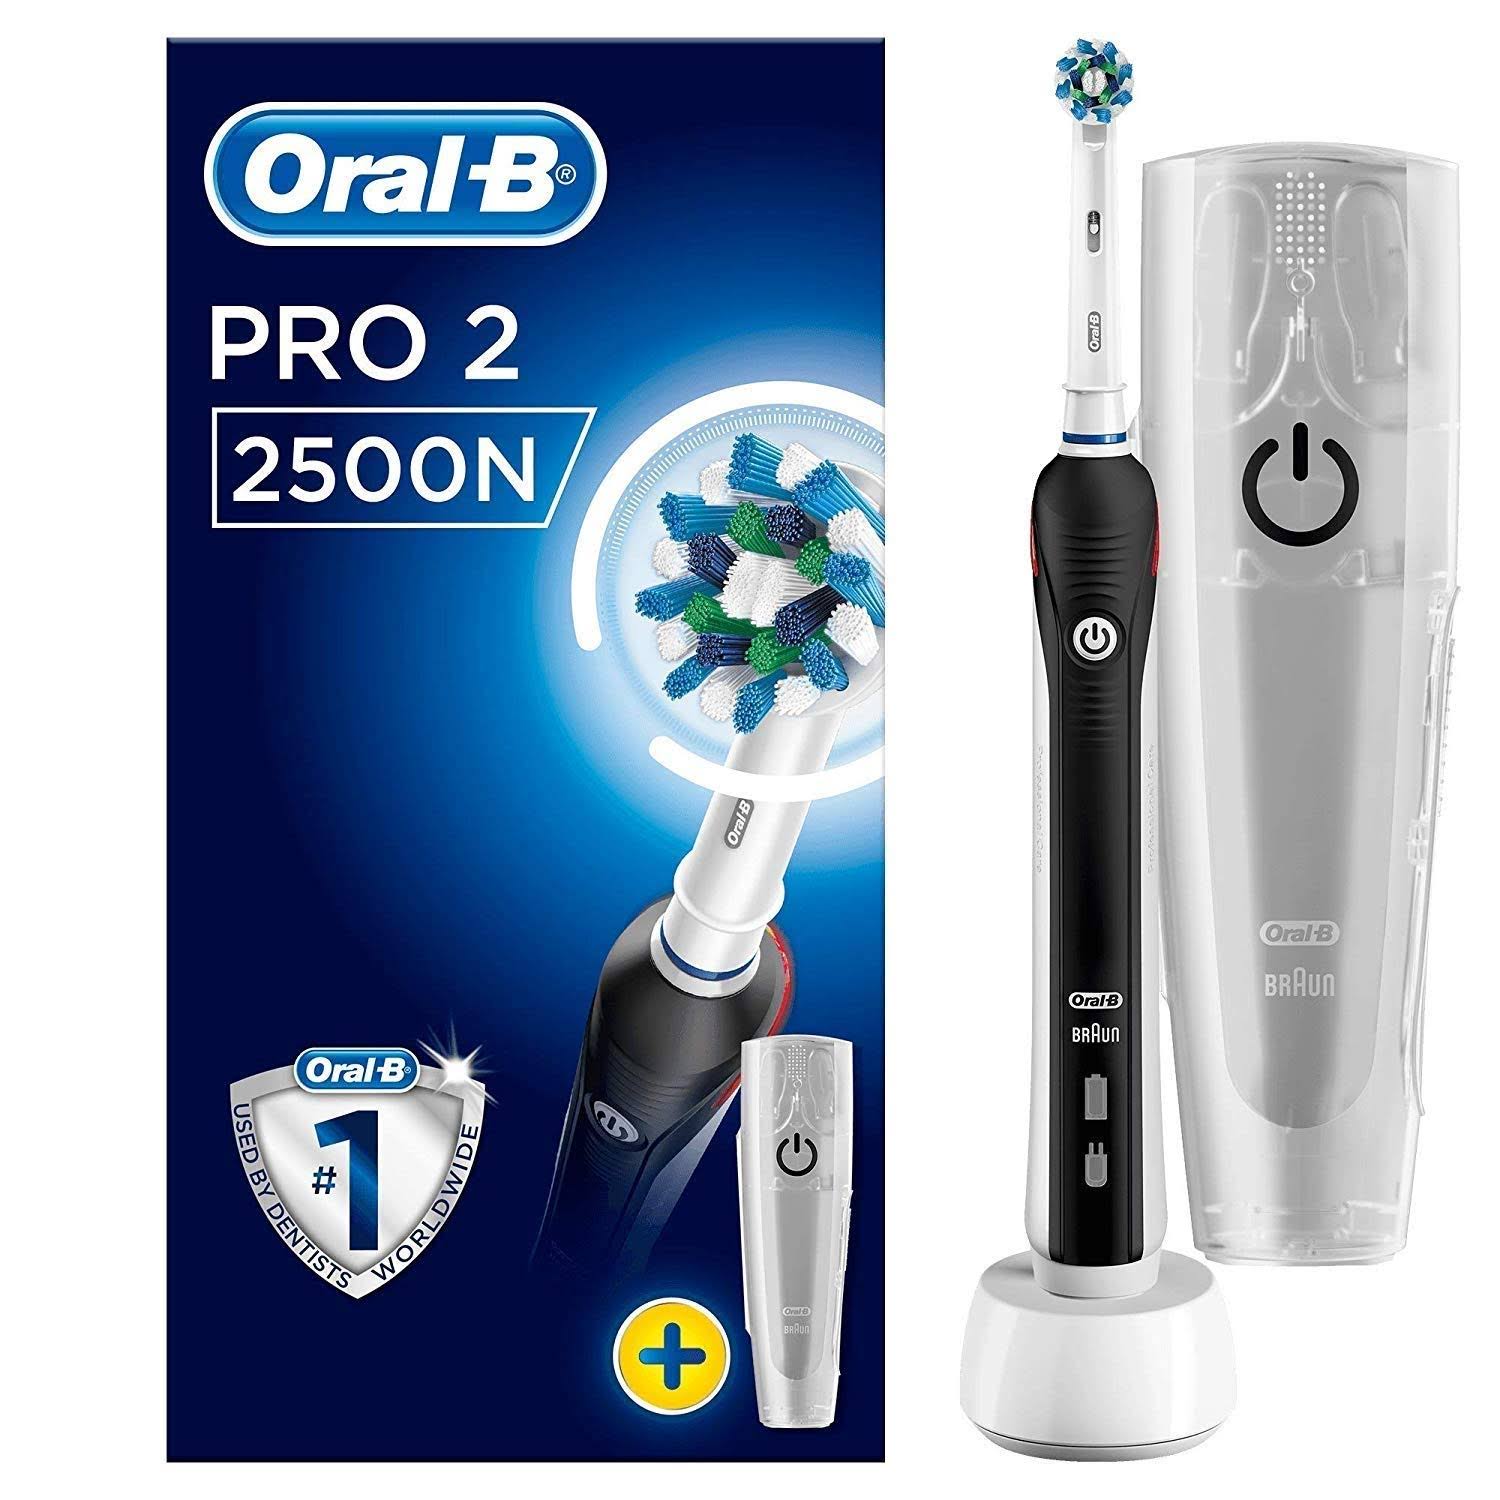 Oral-B Pro 2 2500N CrossAction Electric Toothbrush - with Travel Case, Black